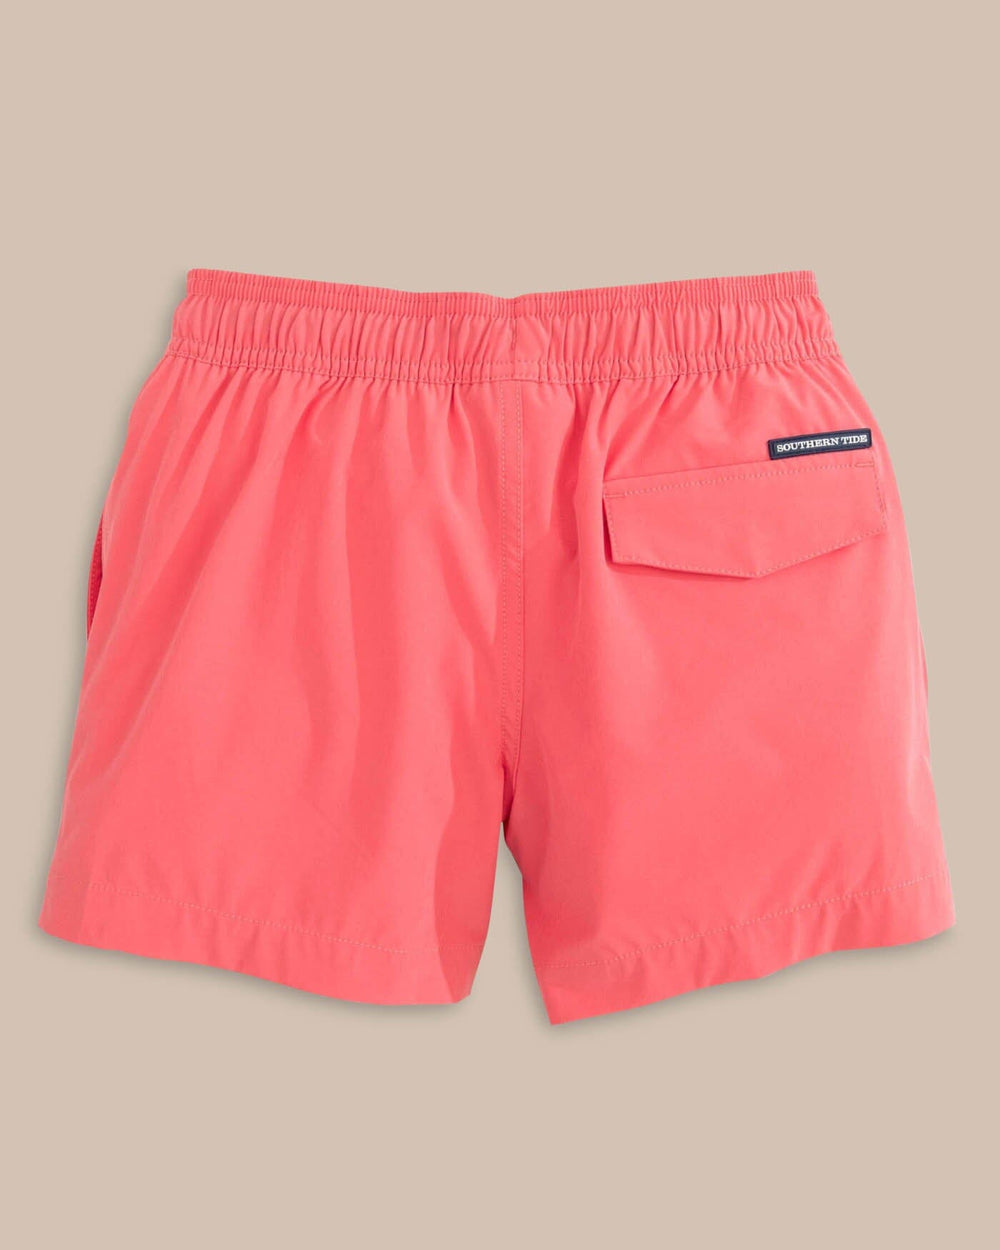 The back view of the Southern Tide Boys Solid Swim Truck 2 0 by Southern Tide - Sunkist Coral